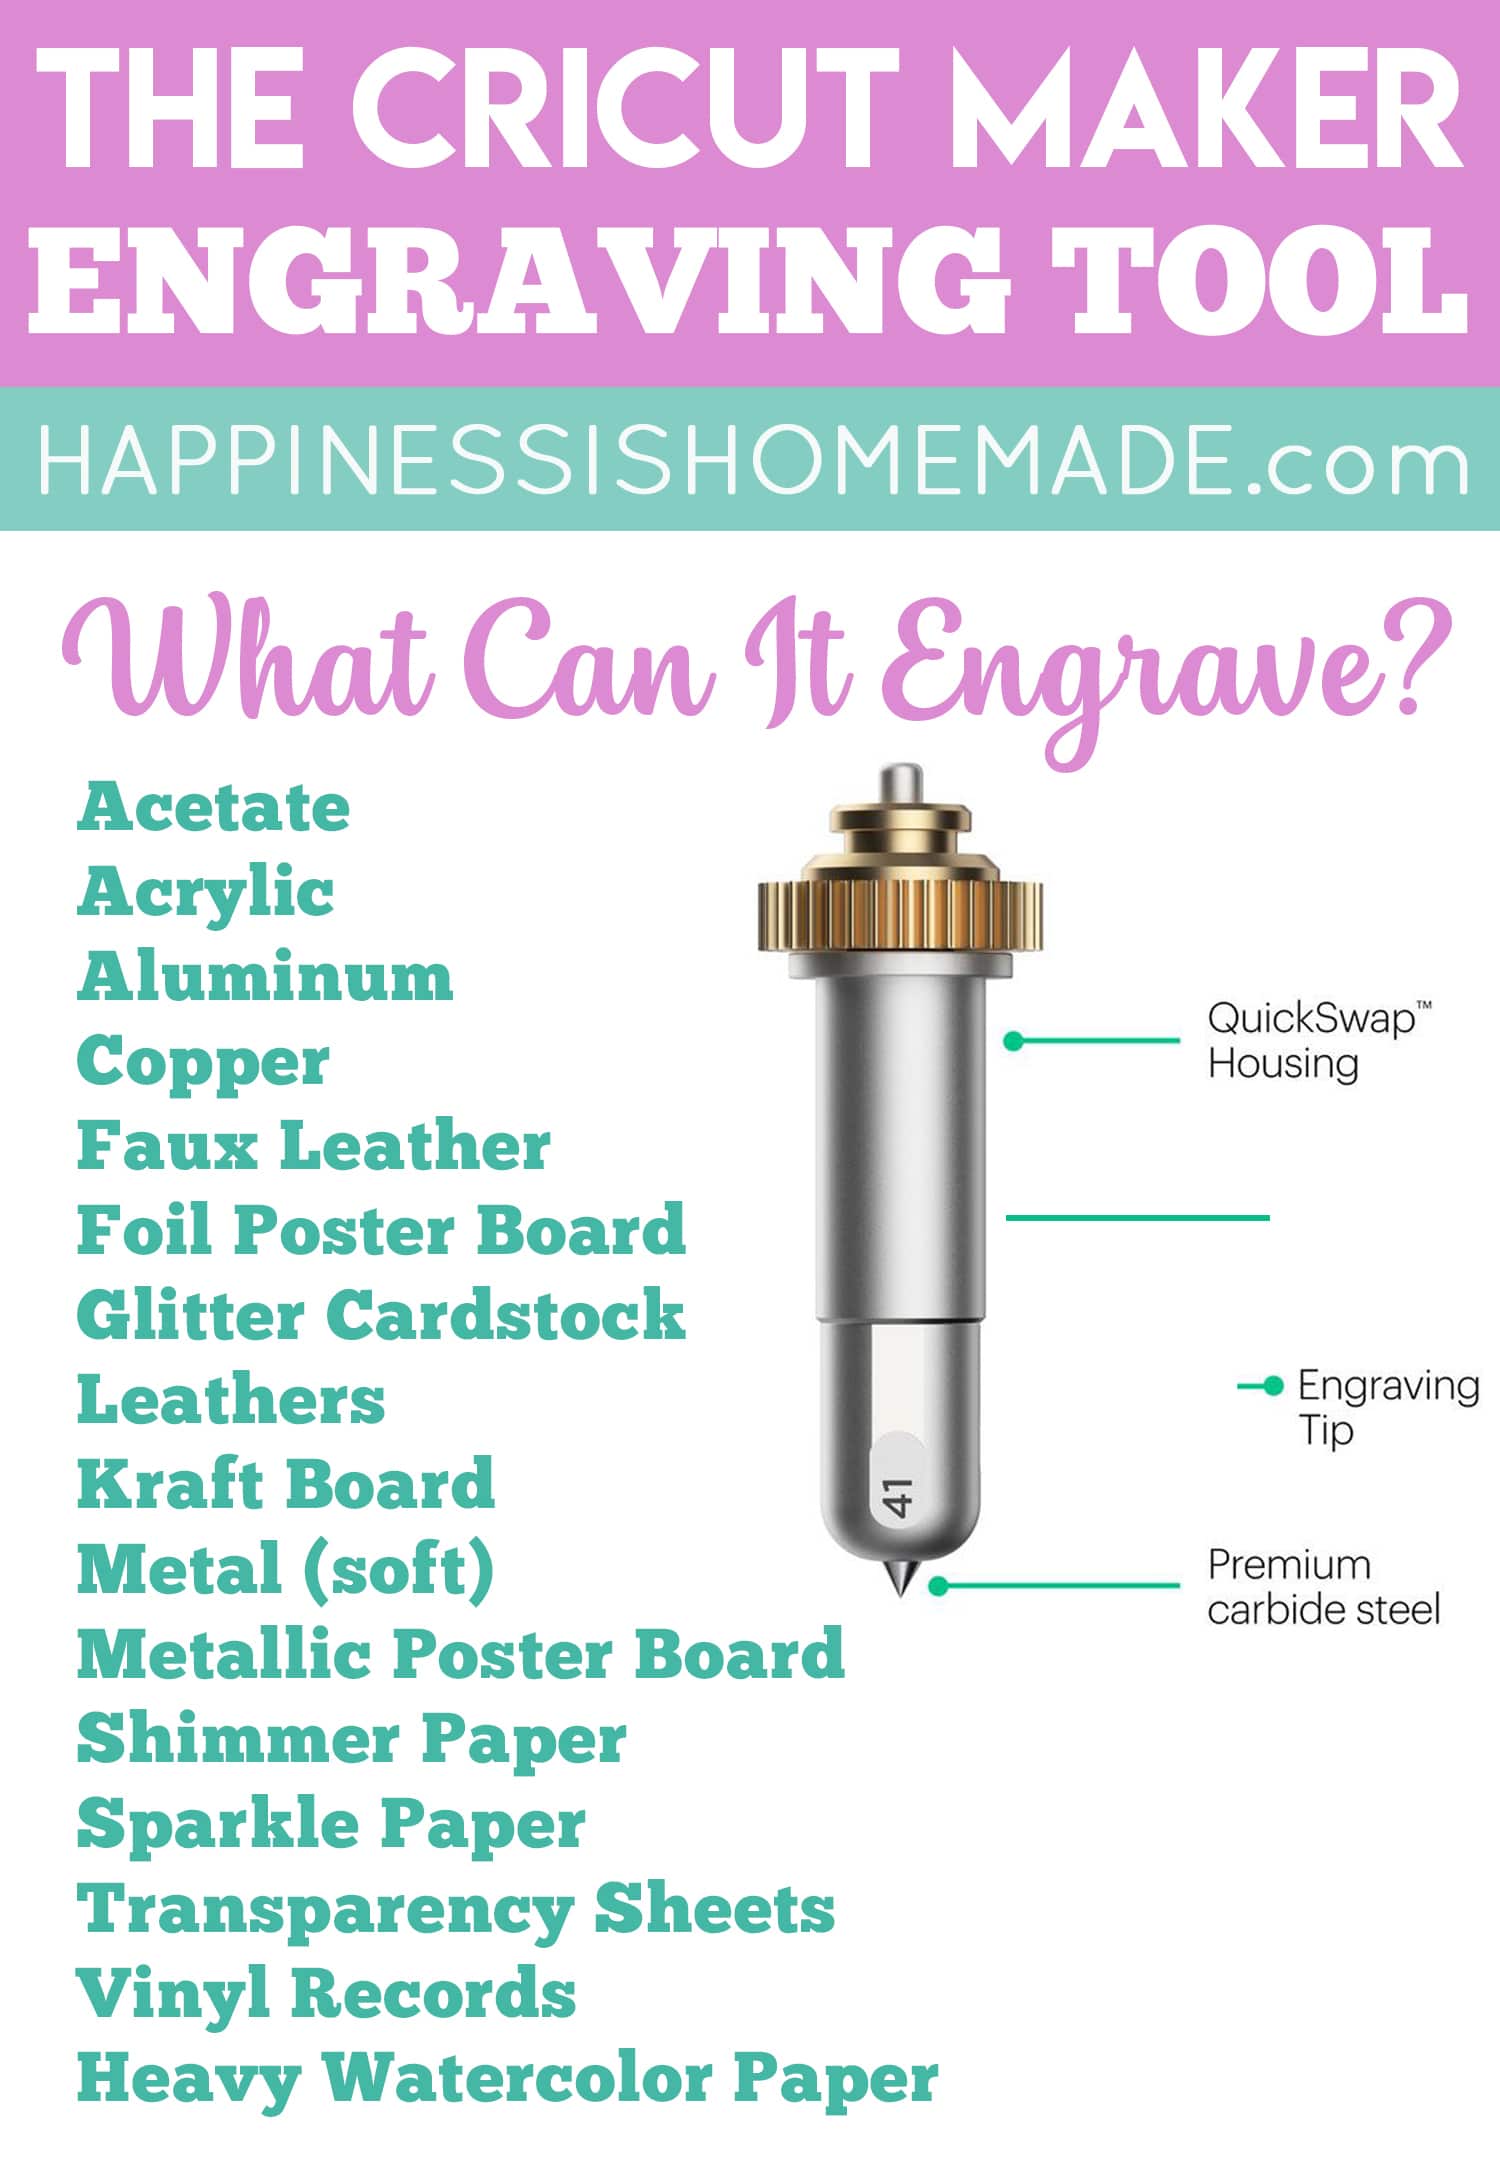 what can it engrave? cricut engraving tool list of materials